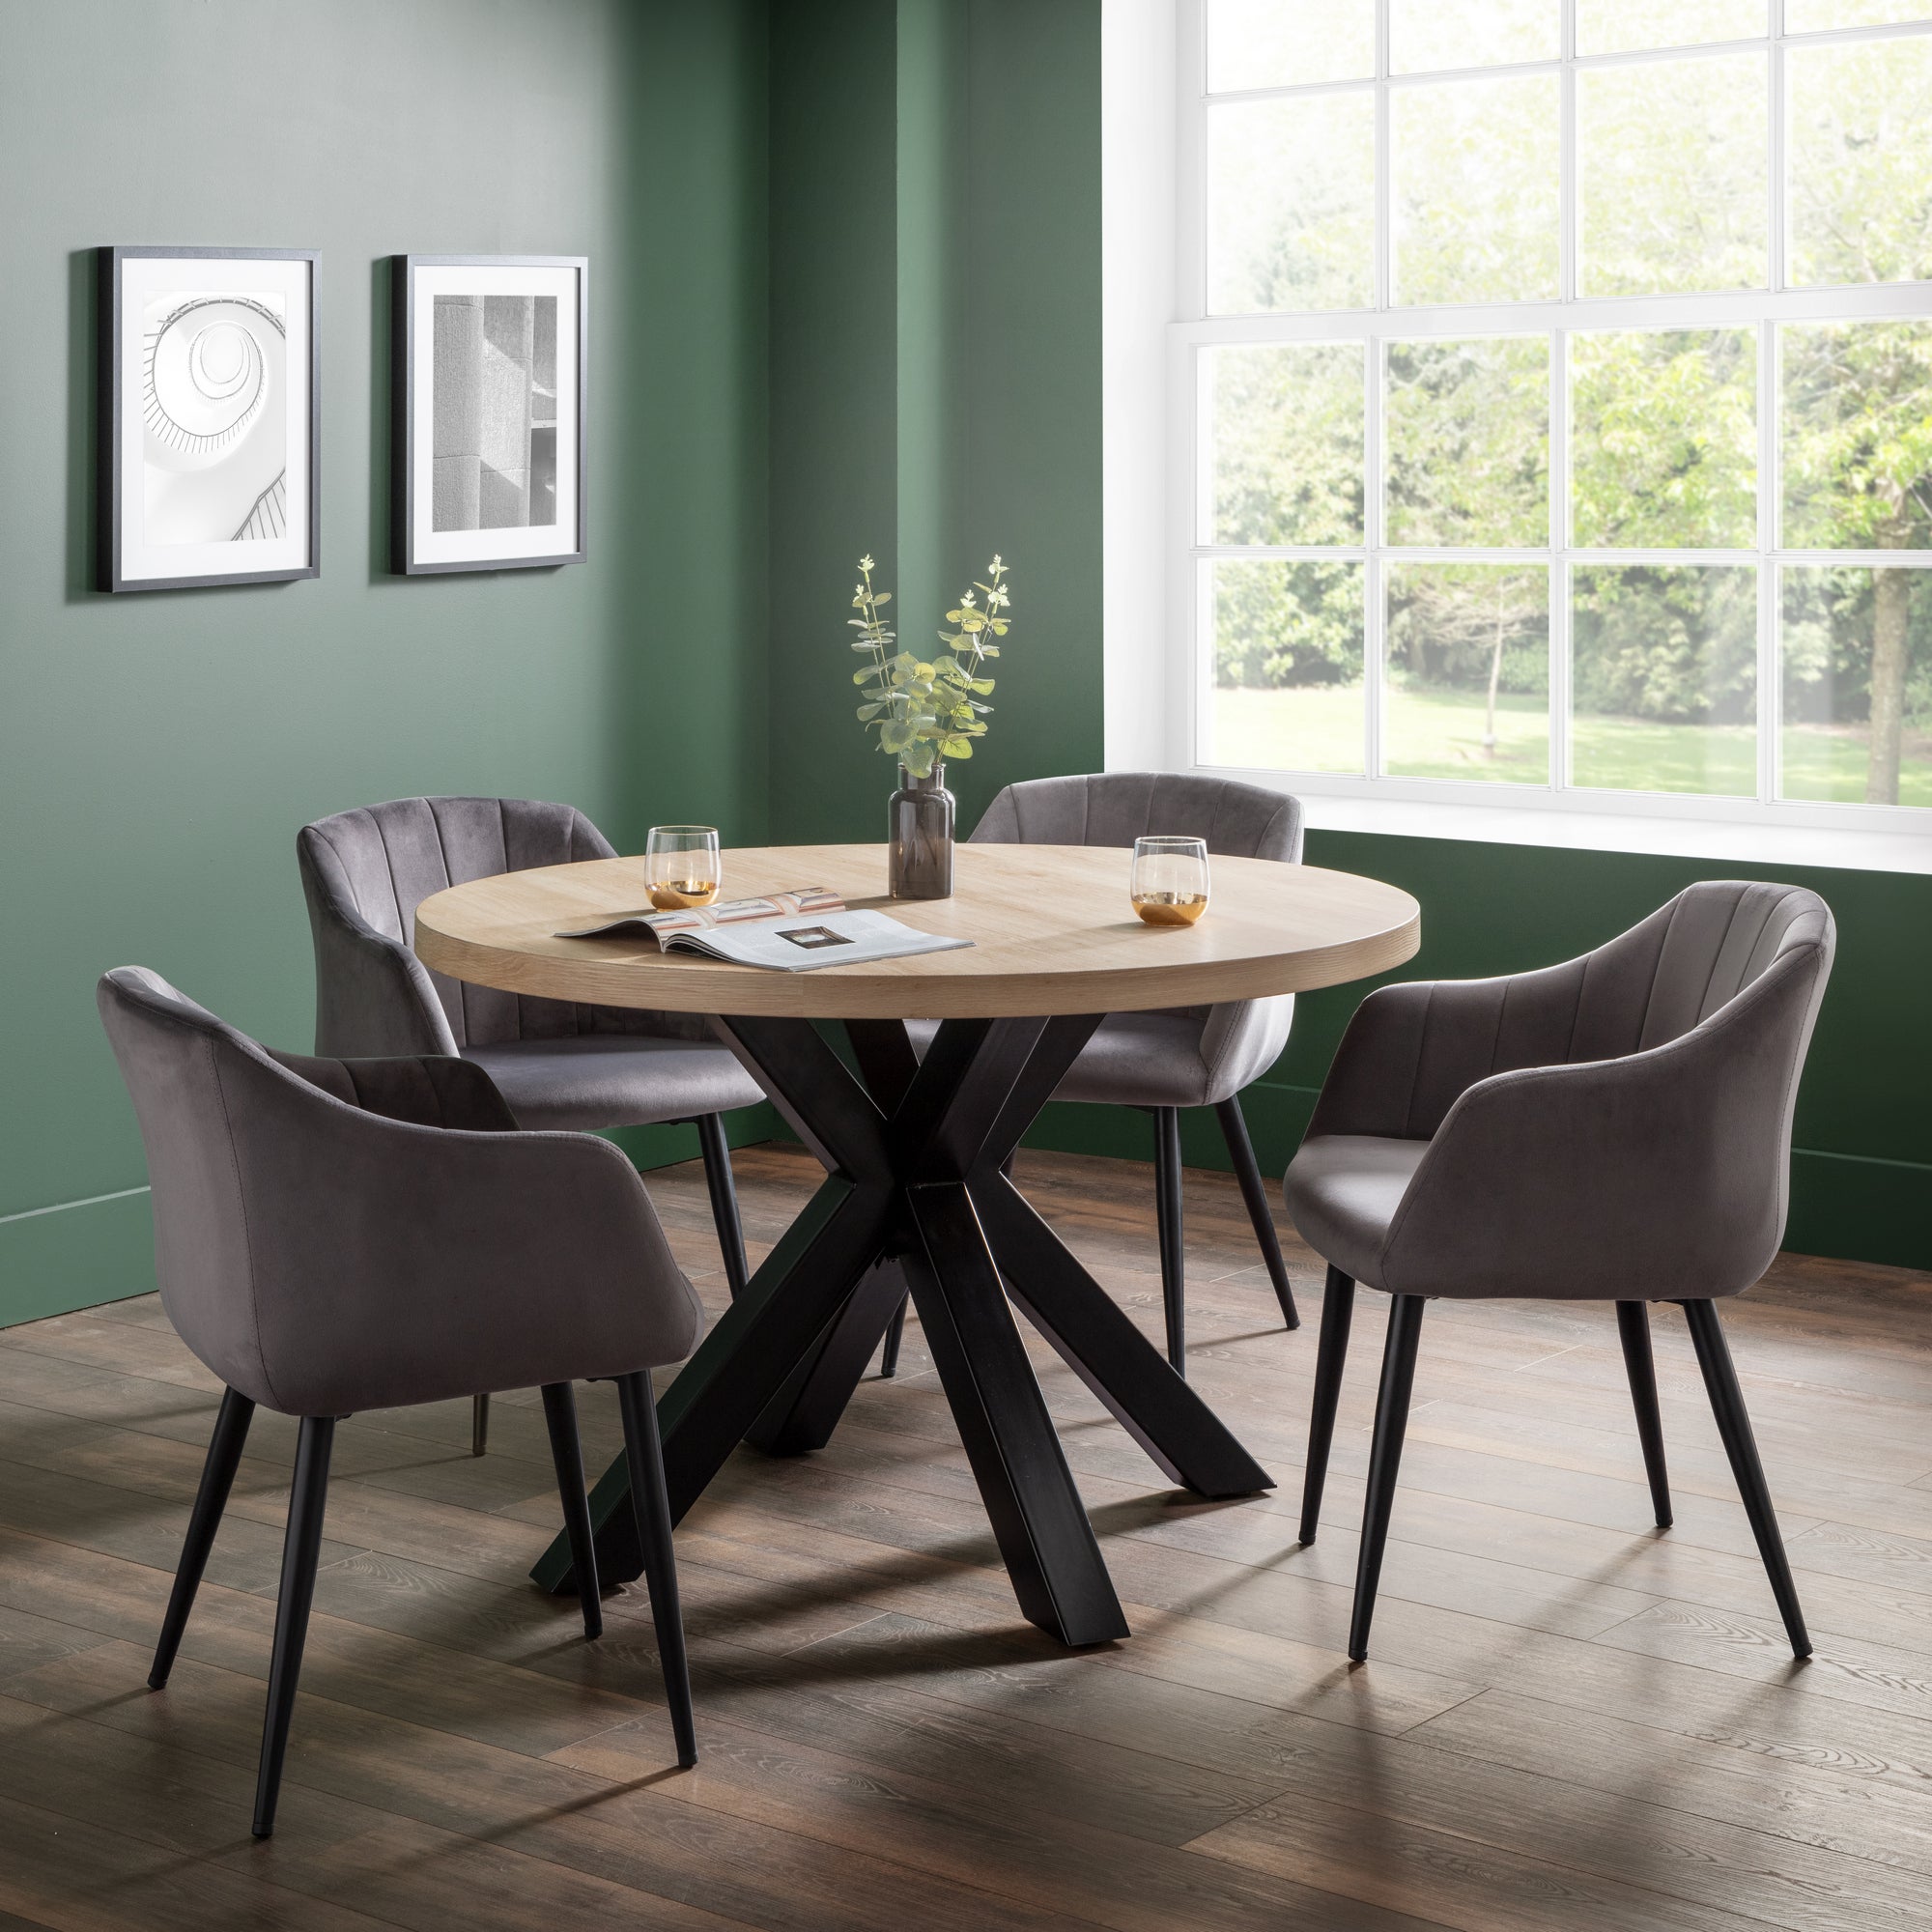 Berwick Round Dining Table with 4 Hobart Chairs